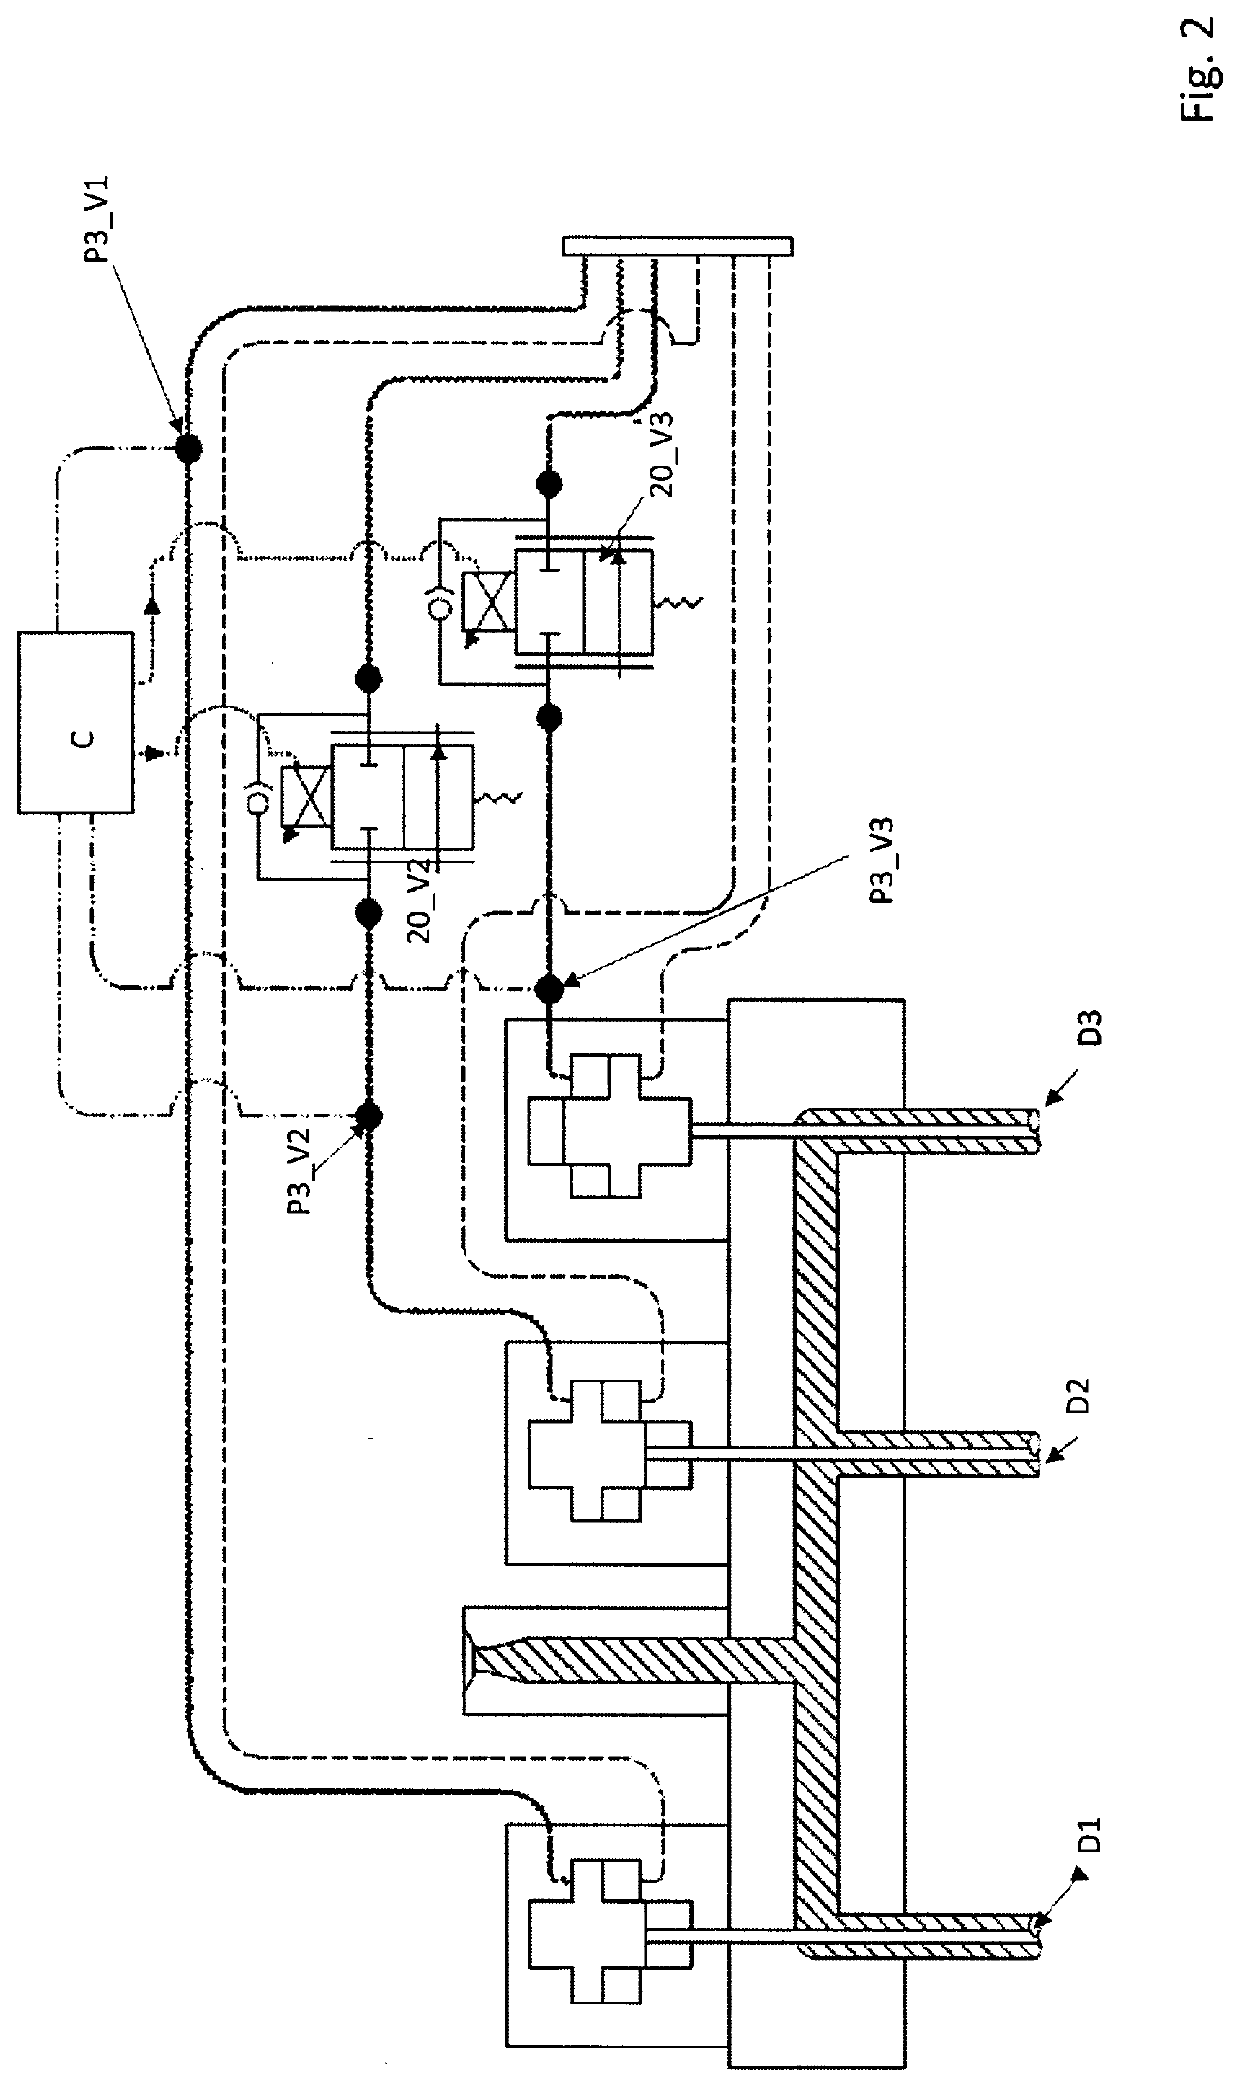 Flow control of an injection molding system